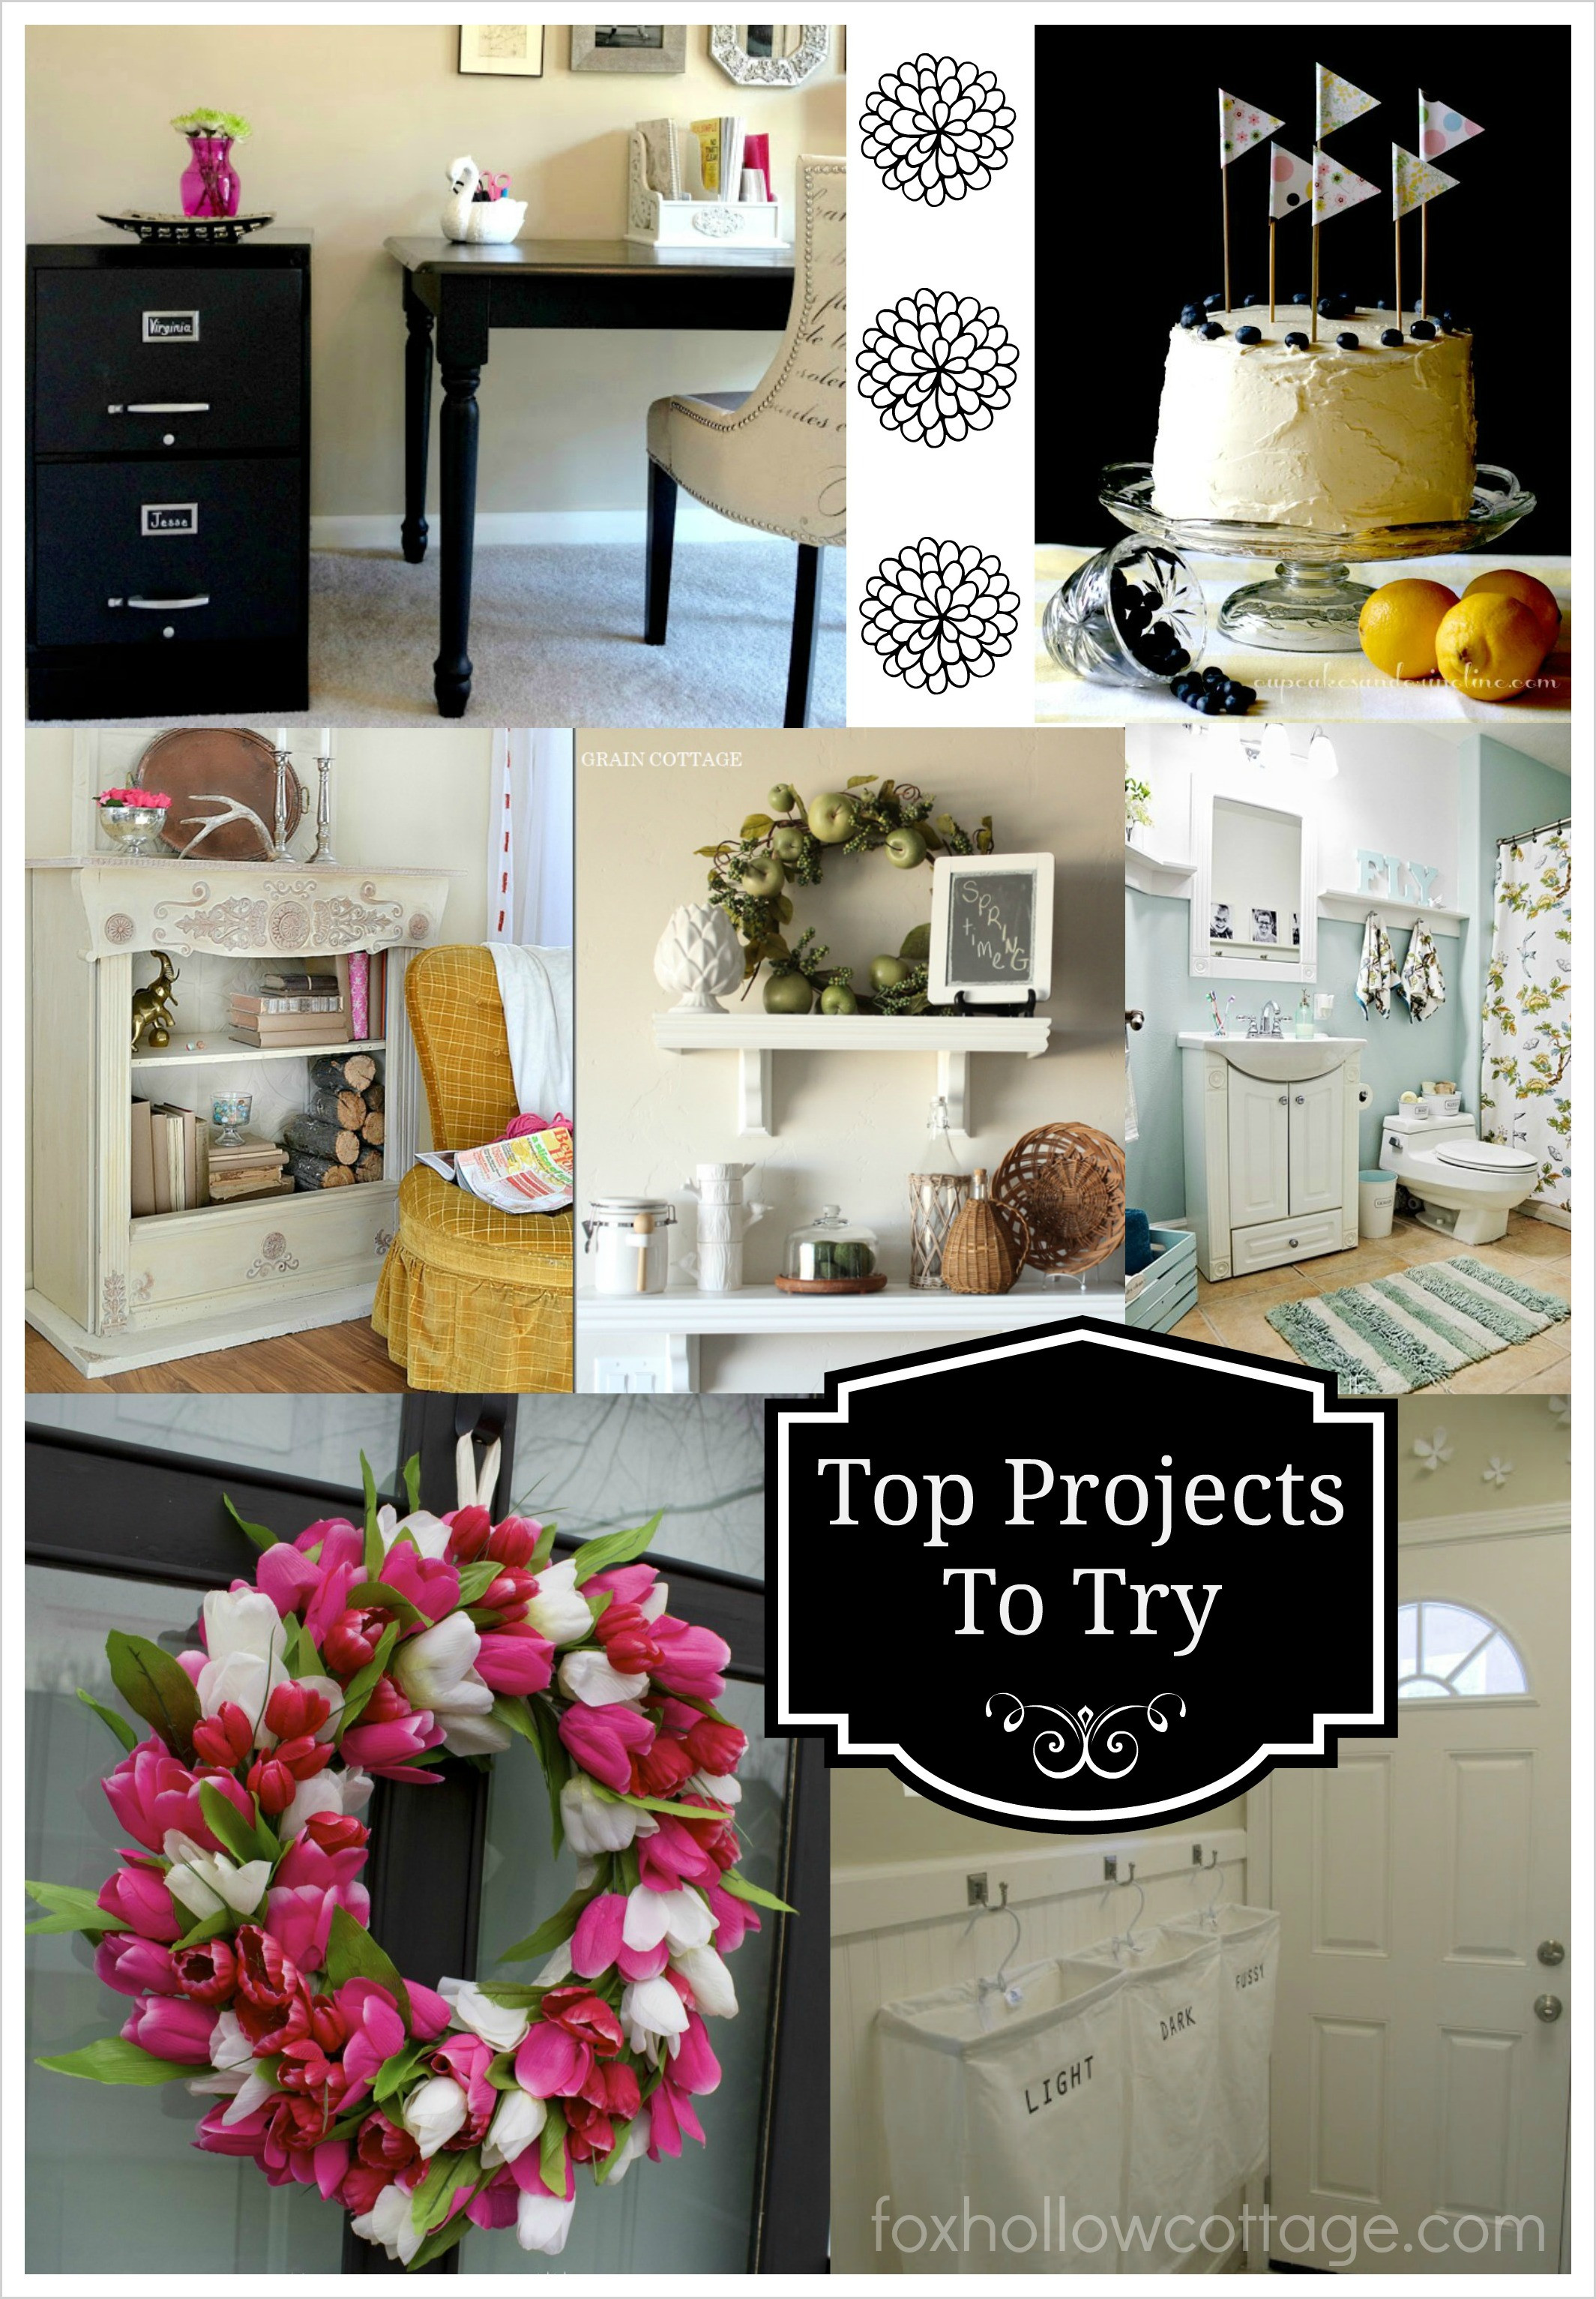 Pinterest Diy Home Decor
 Power Pinterest Link Party and Friday Fav Features 